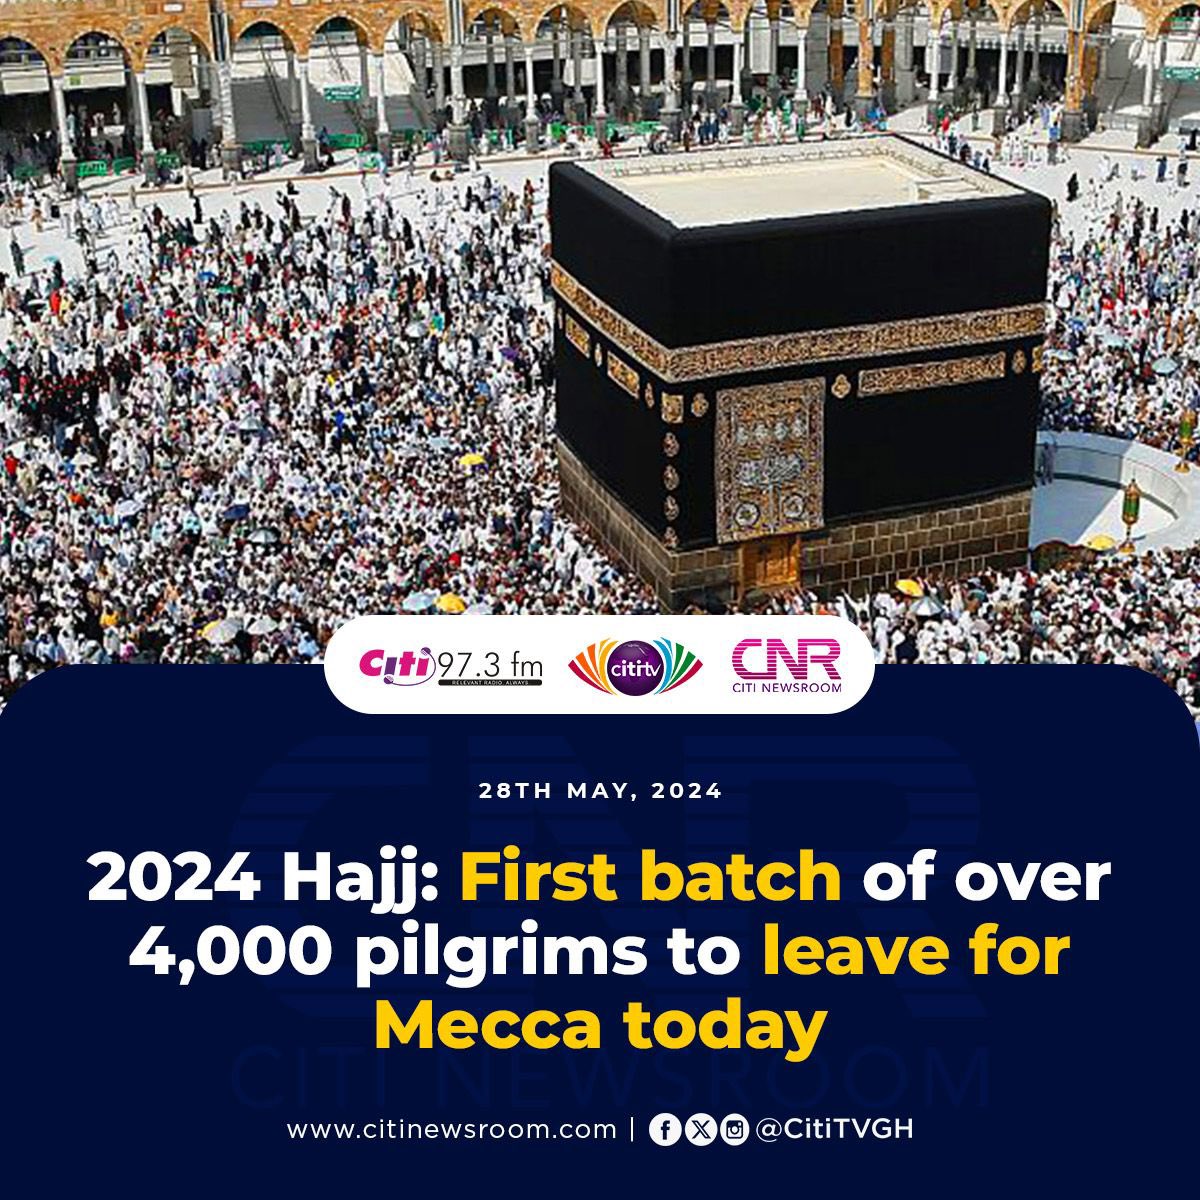 2024 Hajj: First batch of over 4,000 pilgrims to leave for Mecca today 

| More here: tinyurl.com/yhhby2st #CitiNewsroom